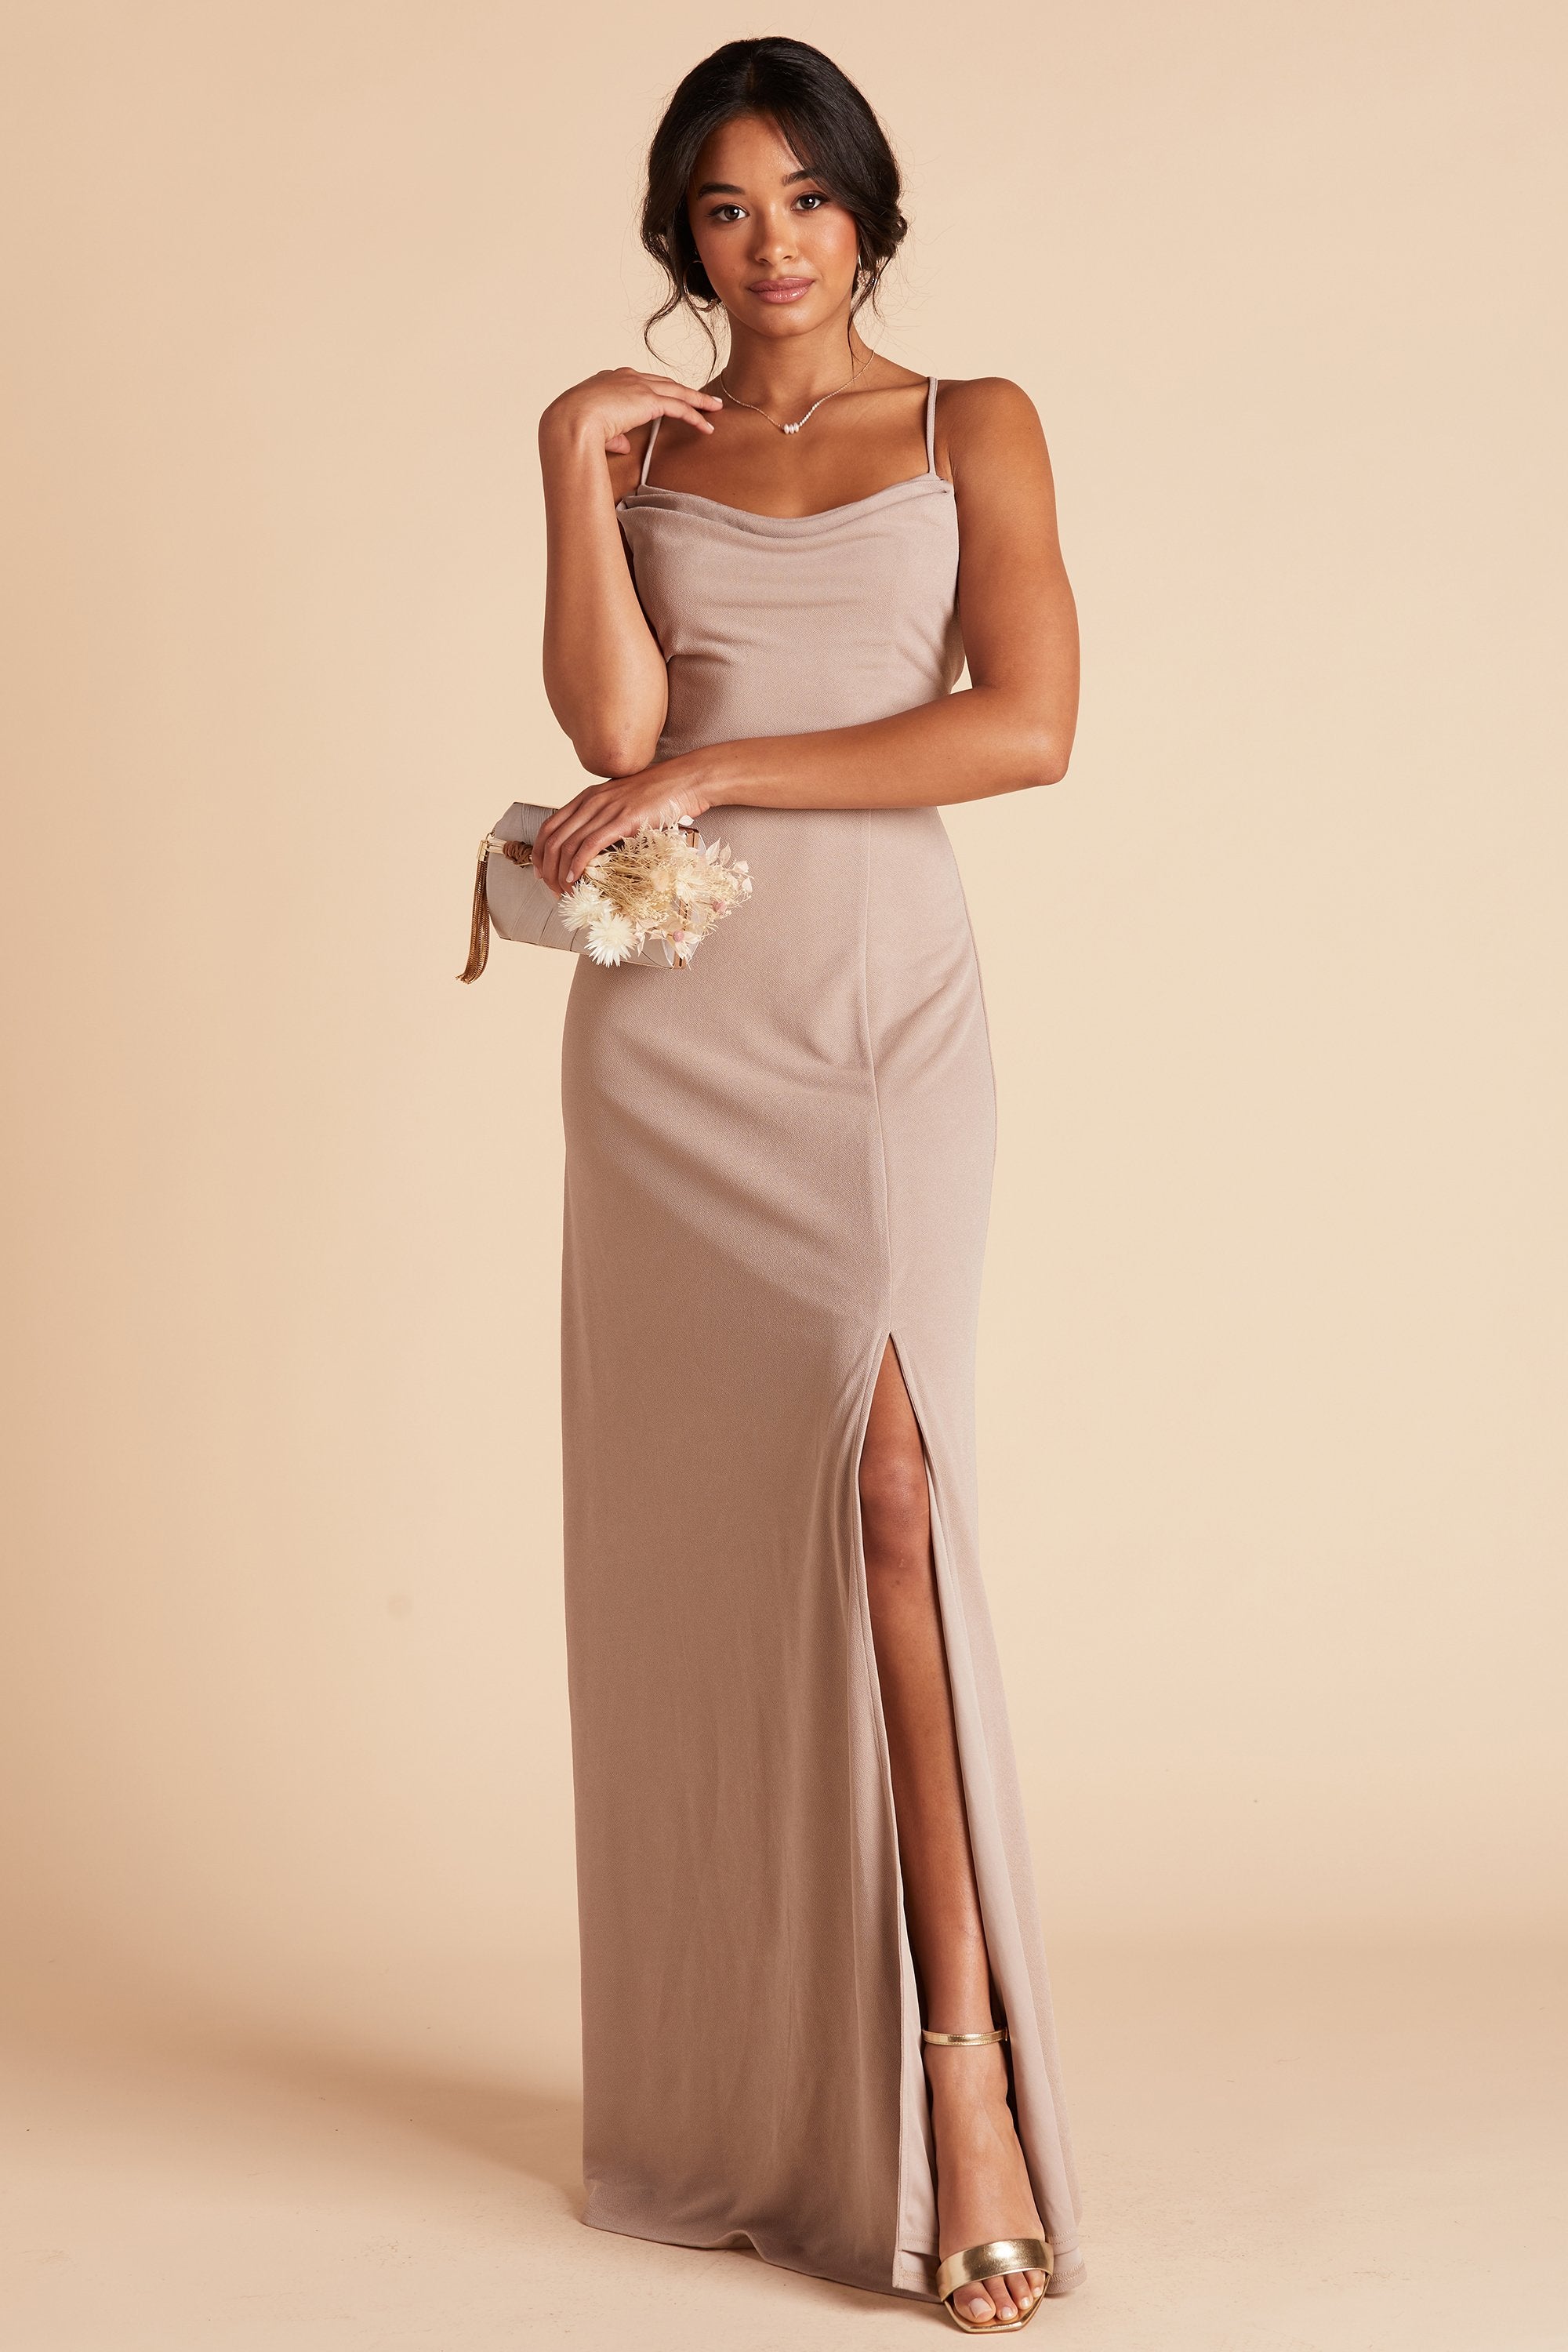 Front view of the Ash Bridesmaid Dress in taupe crepe on a slender model with medium skin tone.